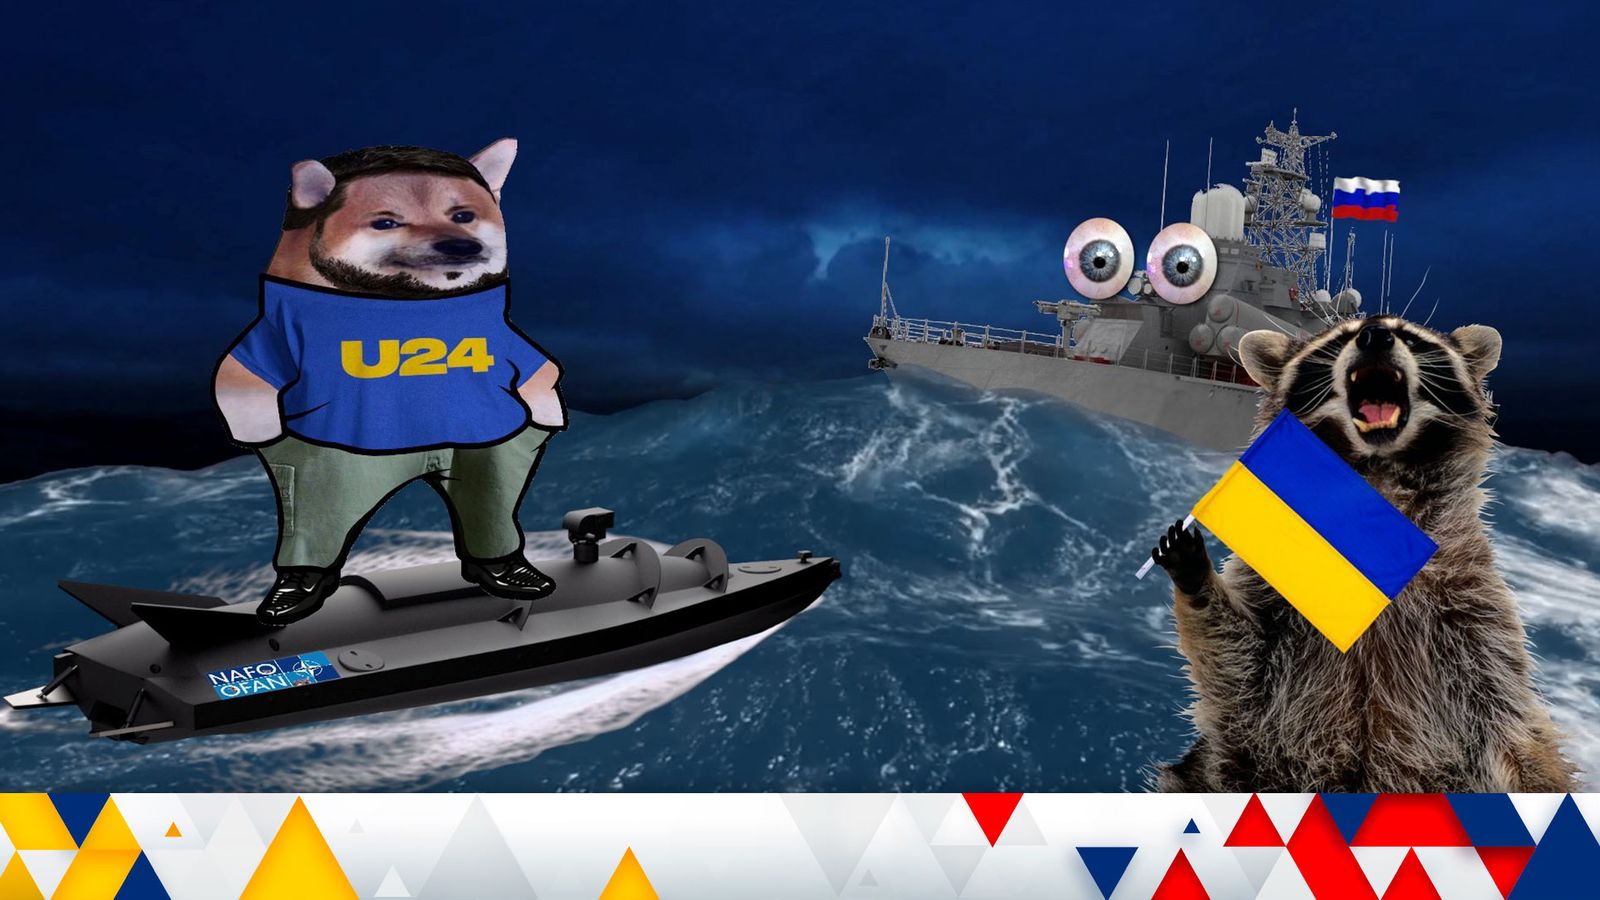 Ukraine's internet army of 'fellas' buy sea drone to hunt Russian ships - and name it after celebrity raccoon